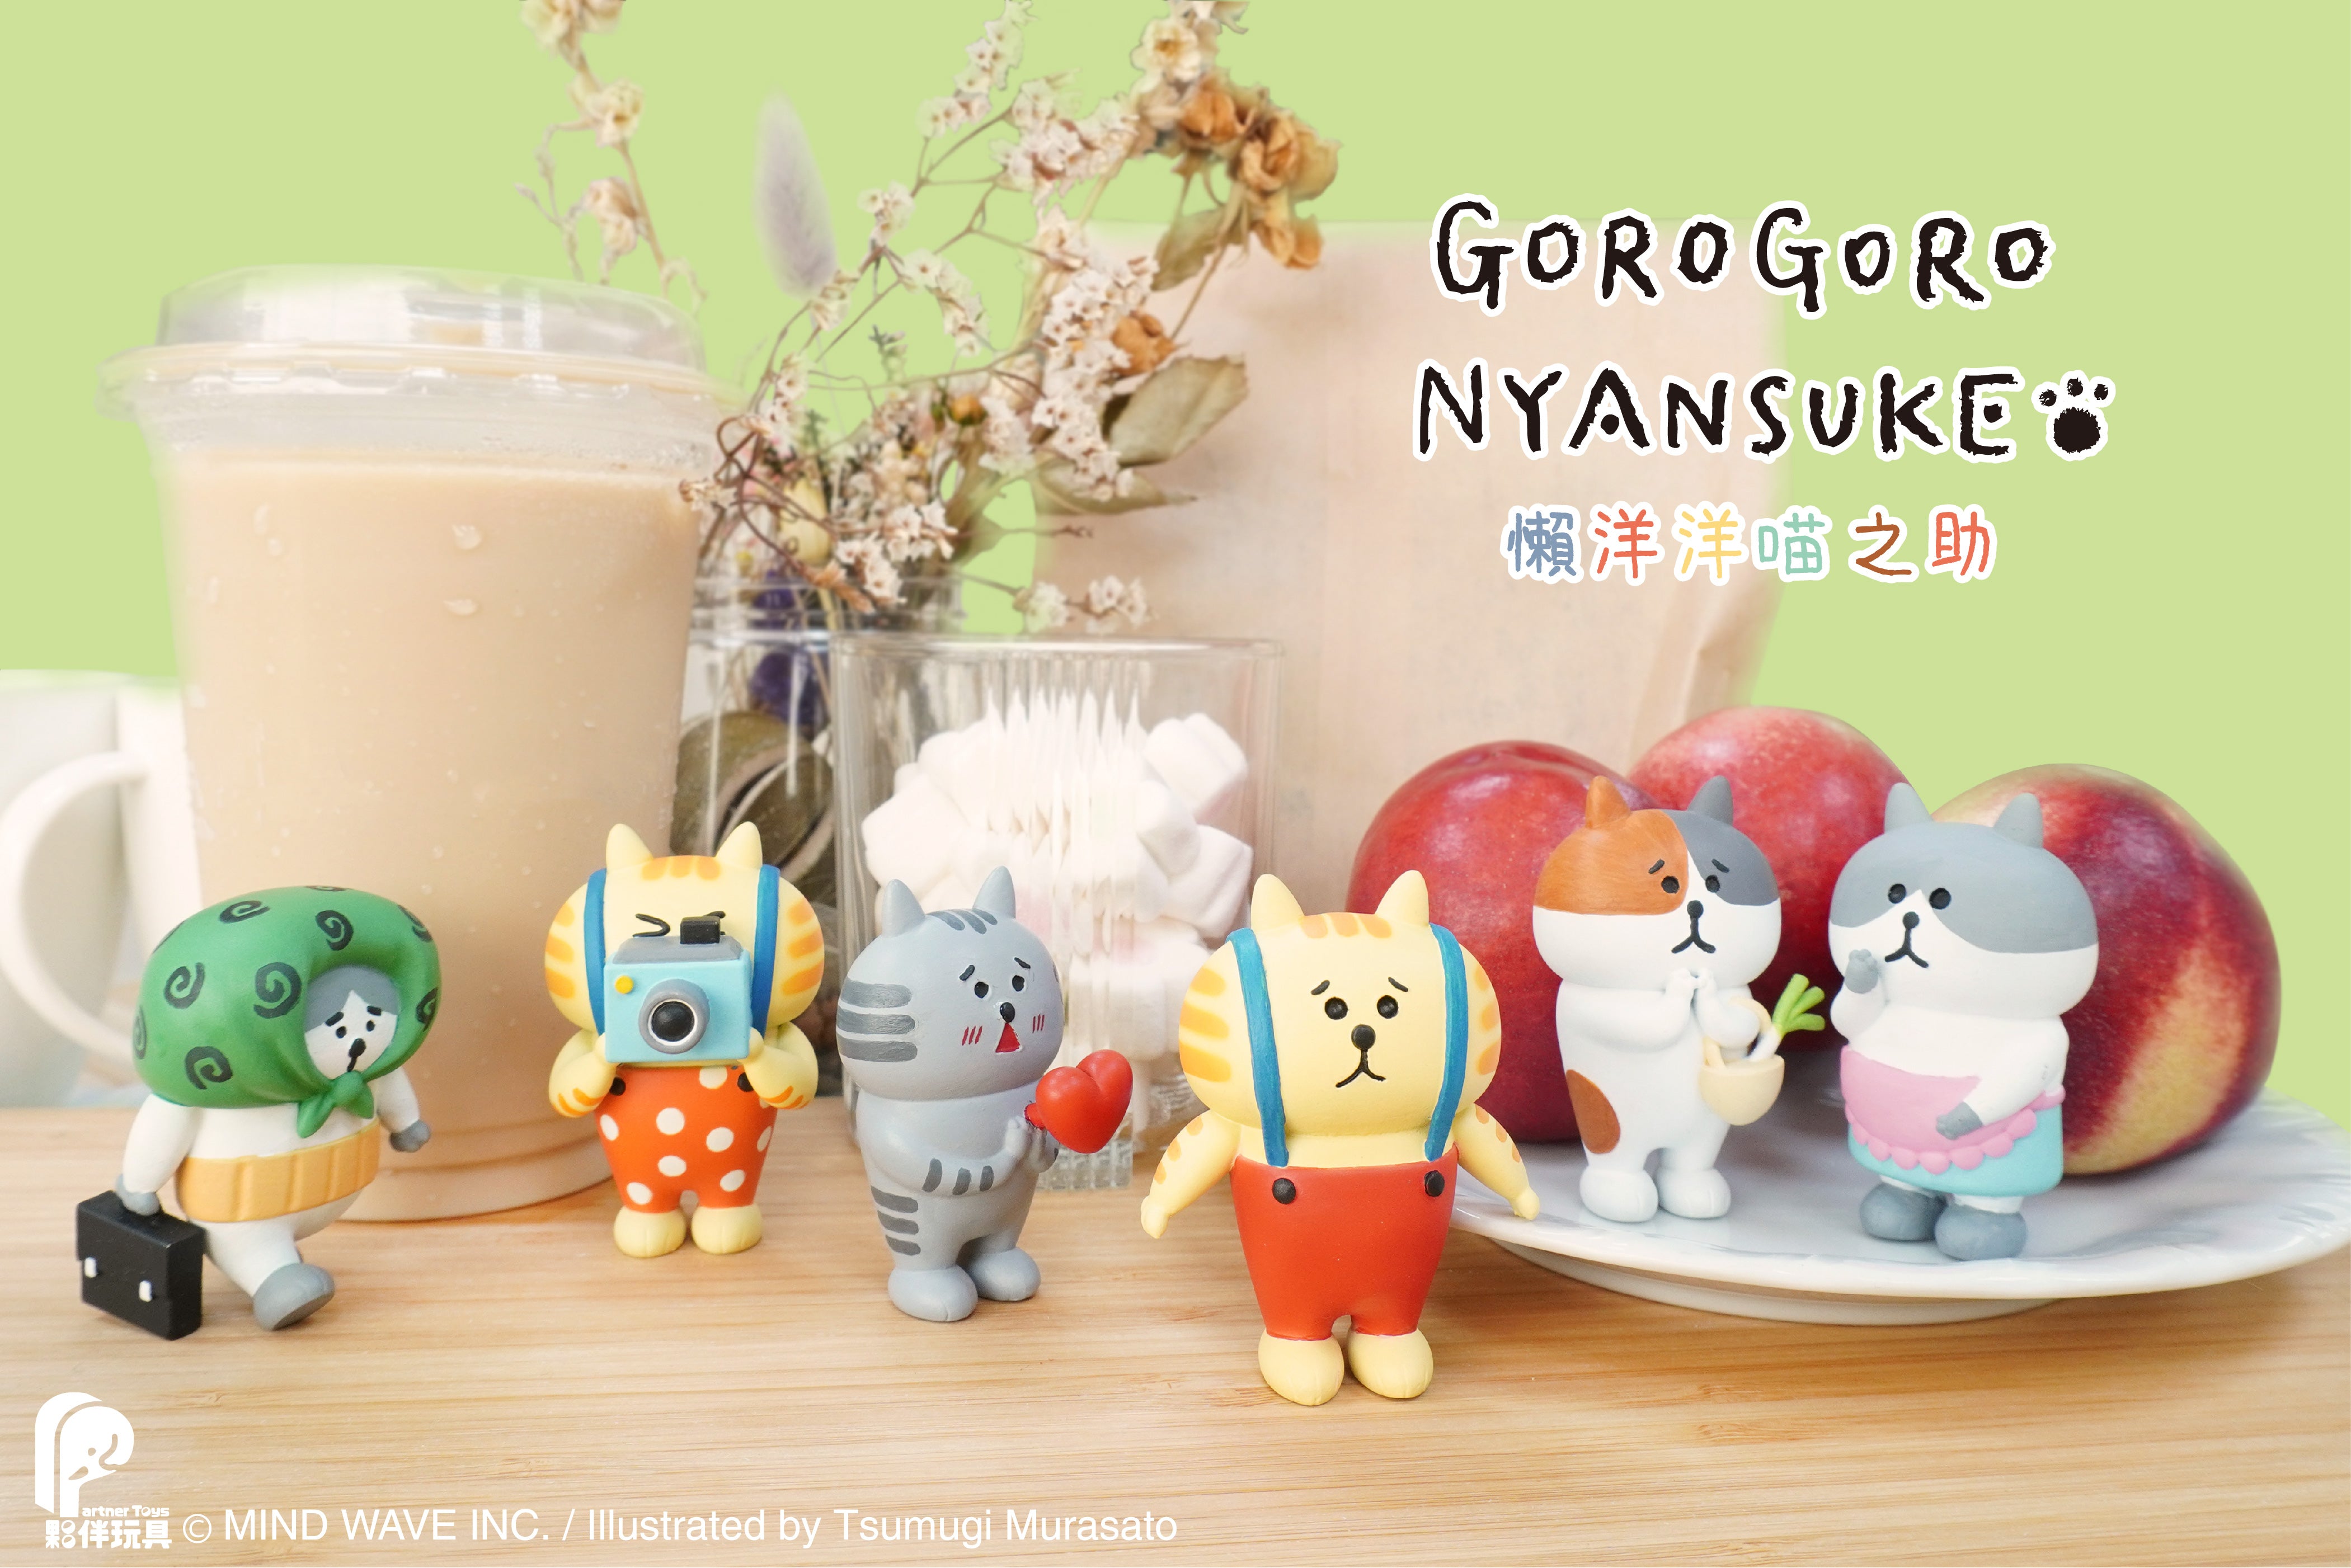 GOROGORO NYANSUKE Gacha Series: Small figurines including toy animals and cartoon characters on a table.